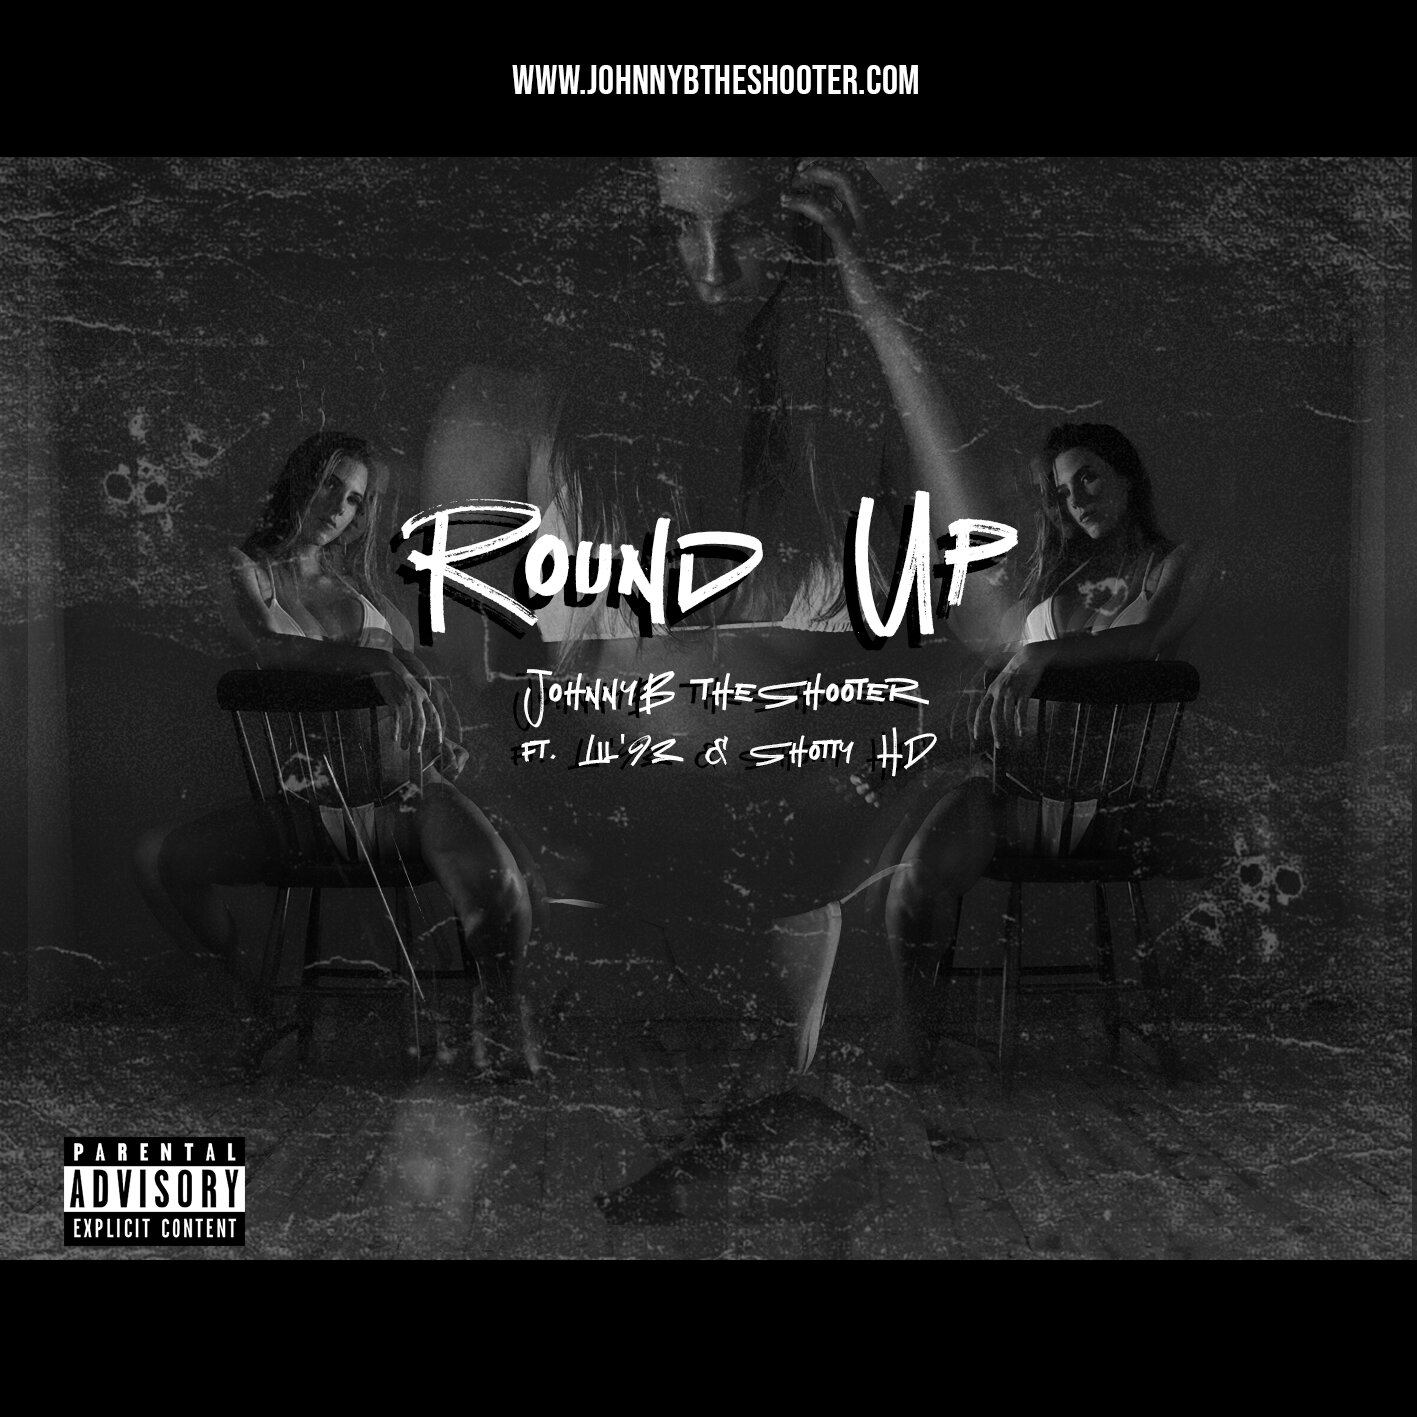 Round Up - JohnnyB theShooter ft Lil '93 & Shotty HD COVER.jpg